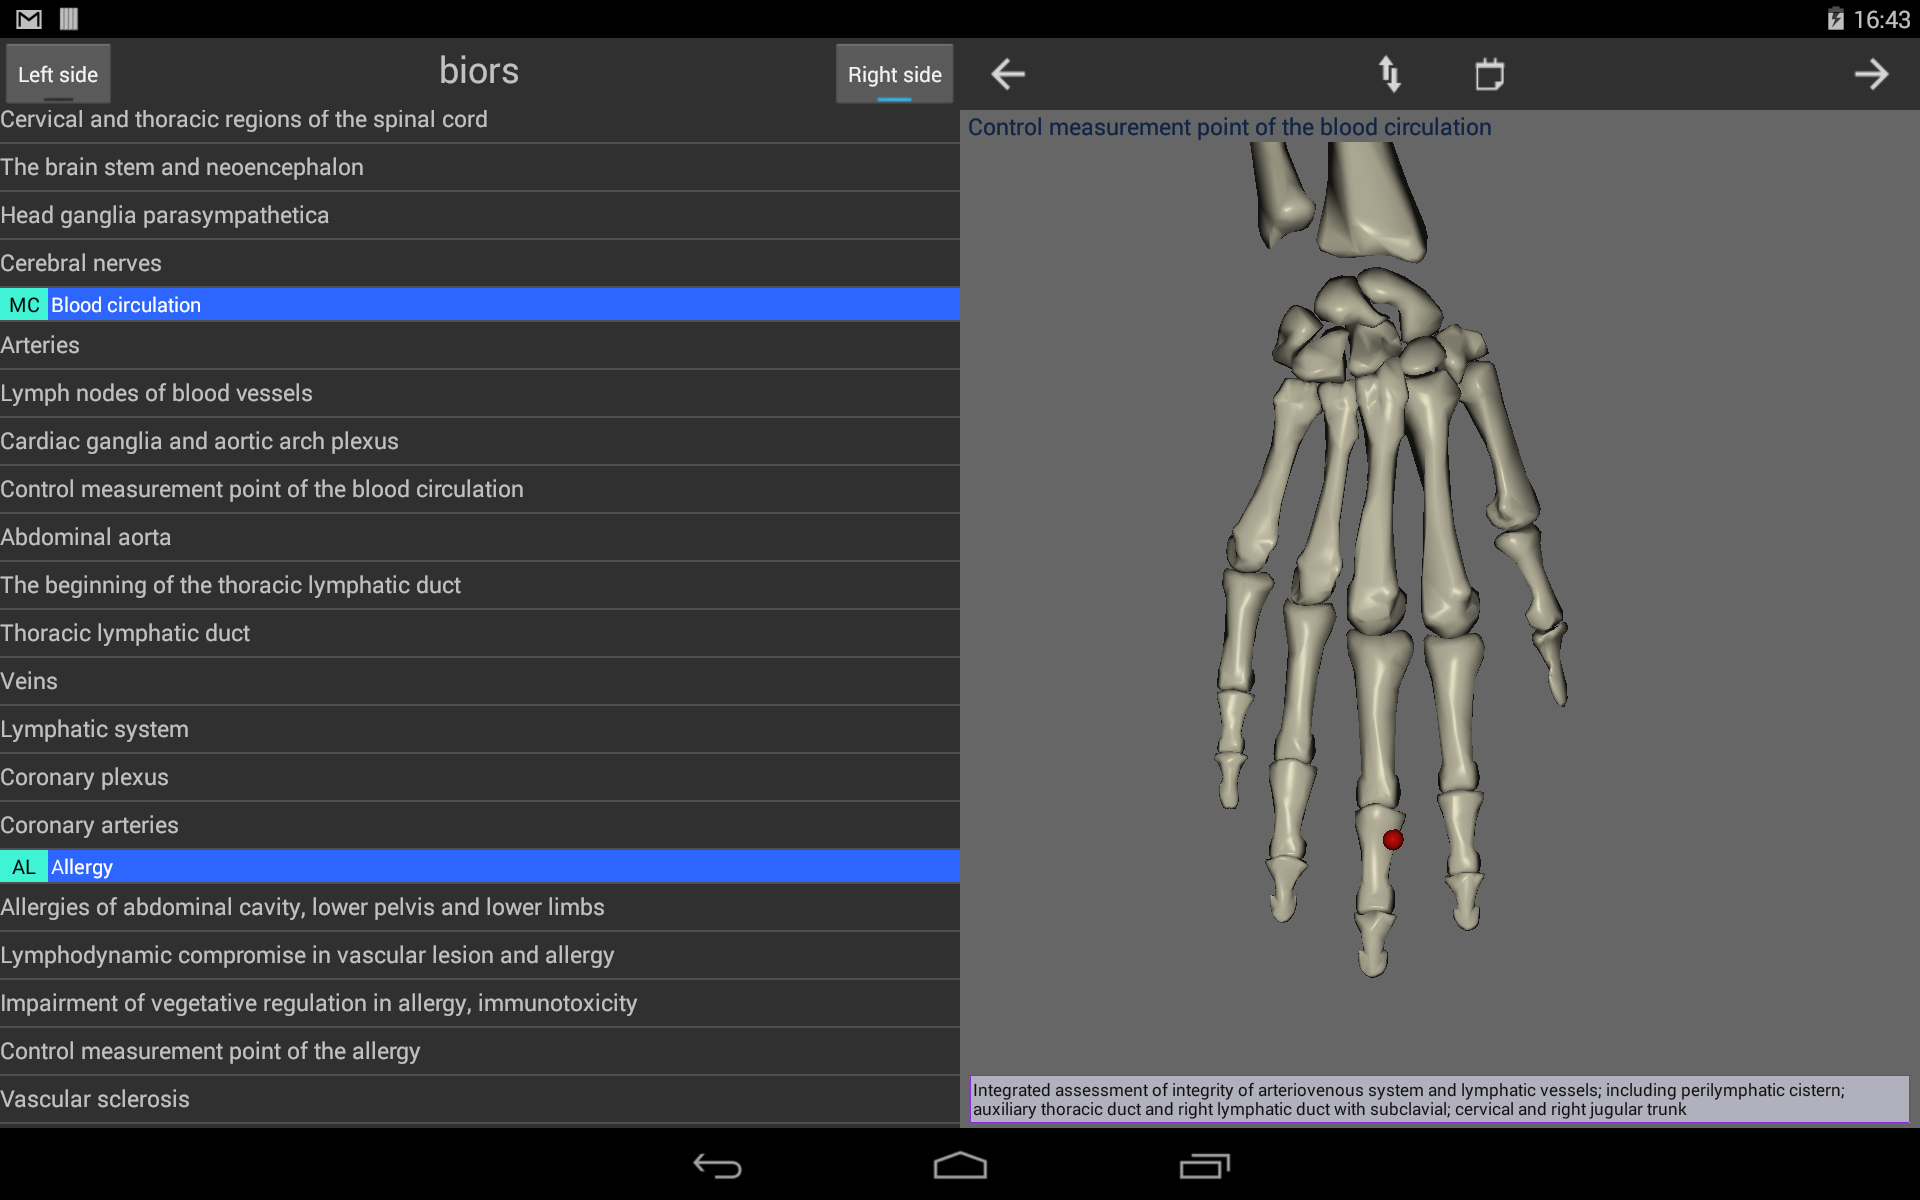 Android application Acupuncture Voll Atlas screenshort